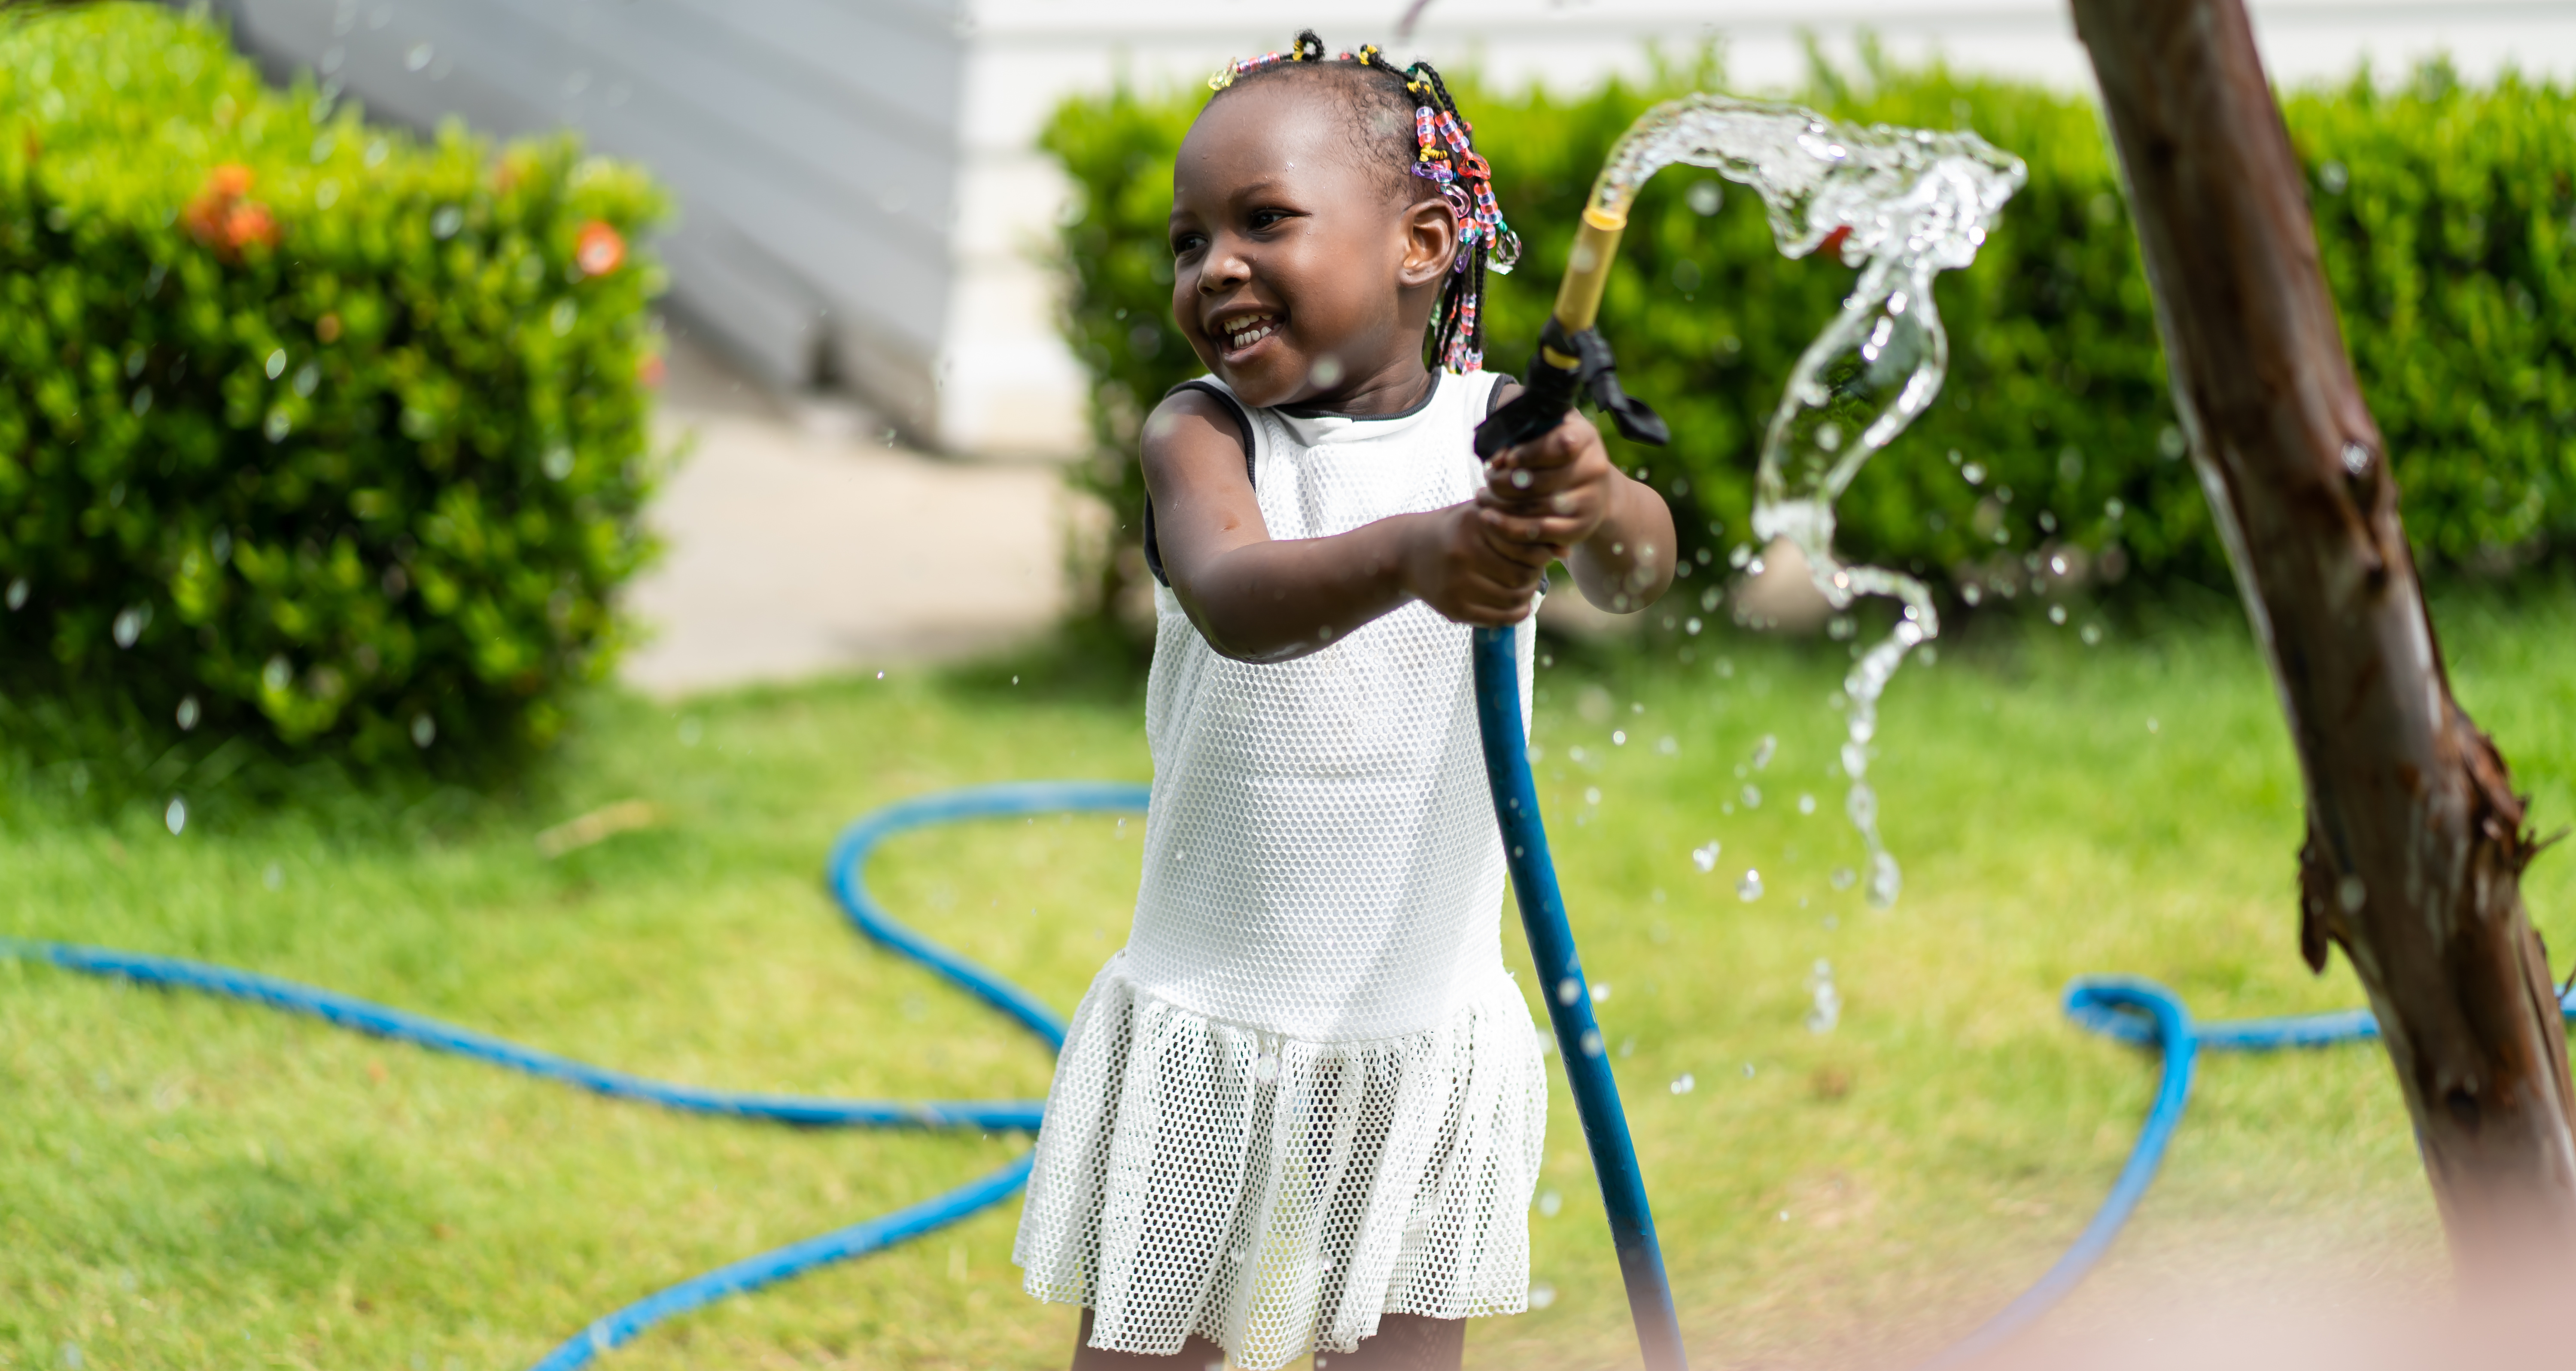 A child holds a hose in the middle of a lawn and smiles